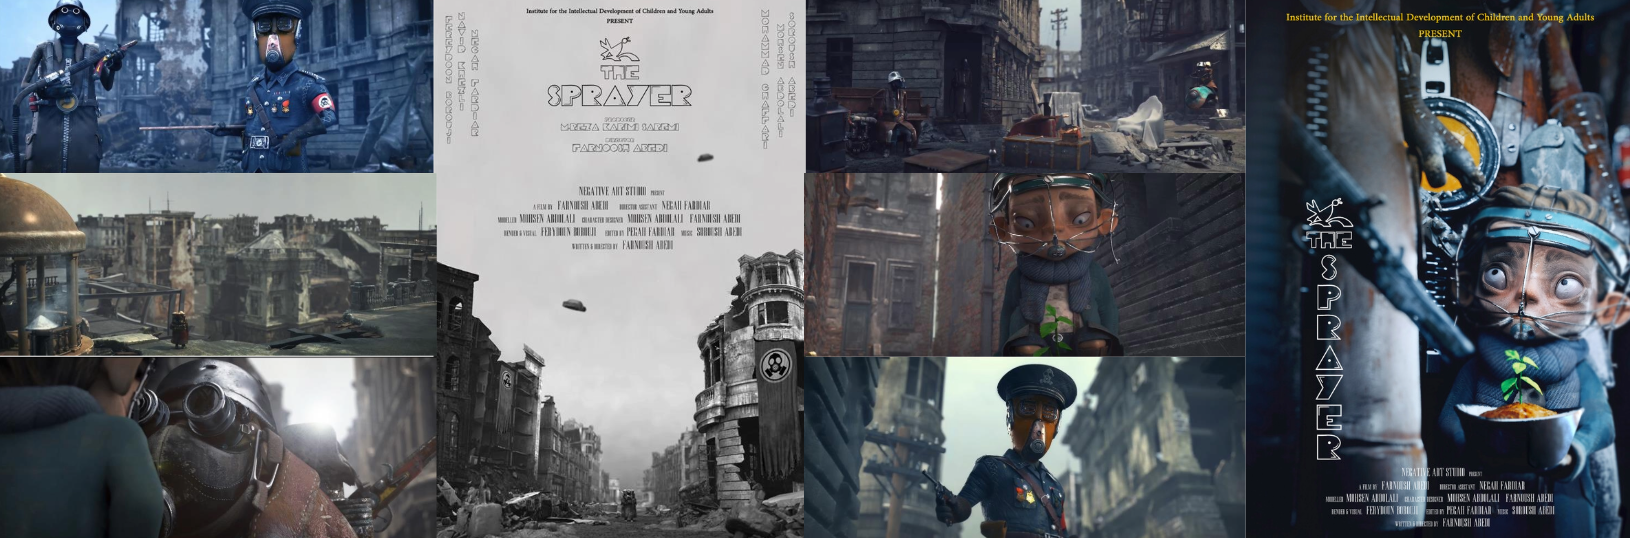 Two posters and six stills from the short film The Sprayer. One poster shows a gloomy city street while the other poster shows a small person wearing a face shield and holding a small plant. The other stills show additional shots of the decaying city and of people wearing military uniforms and facial coverings.